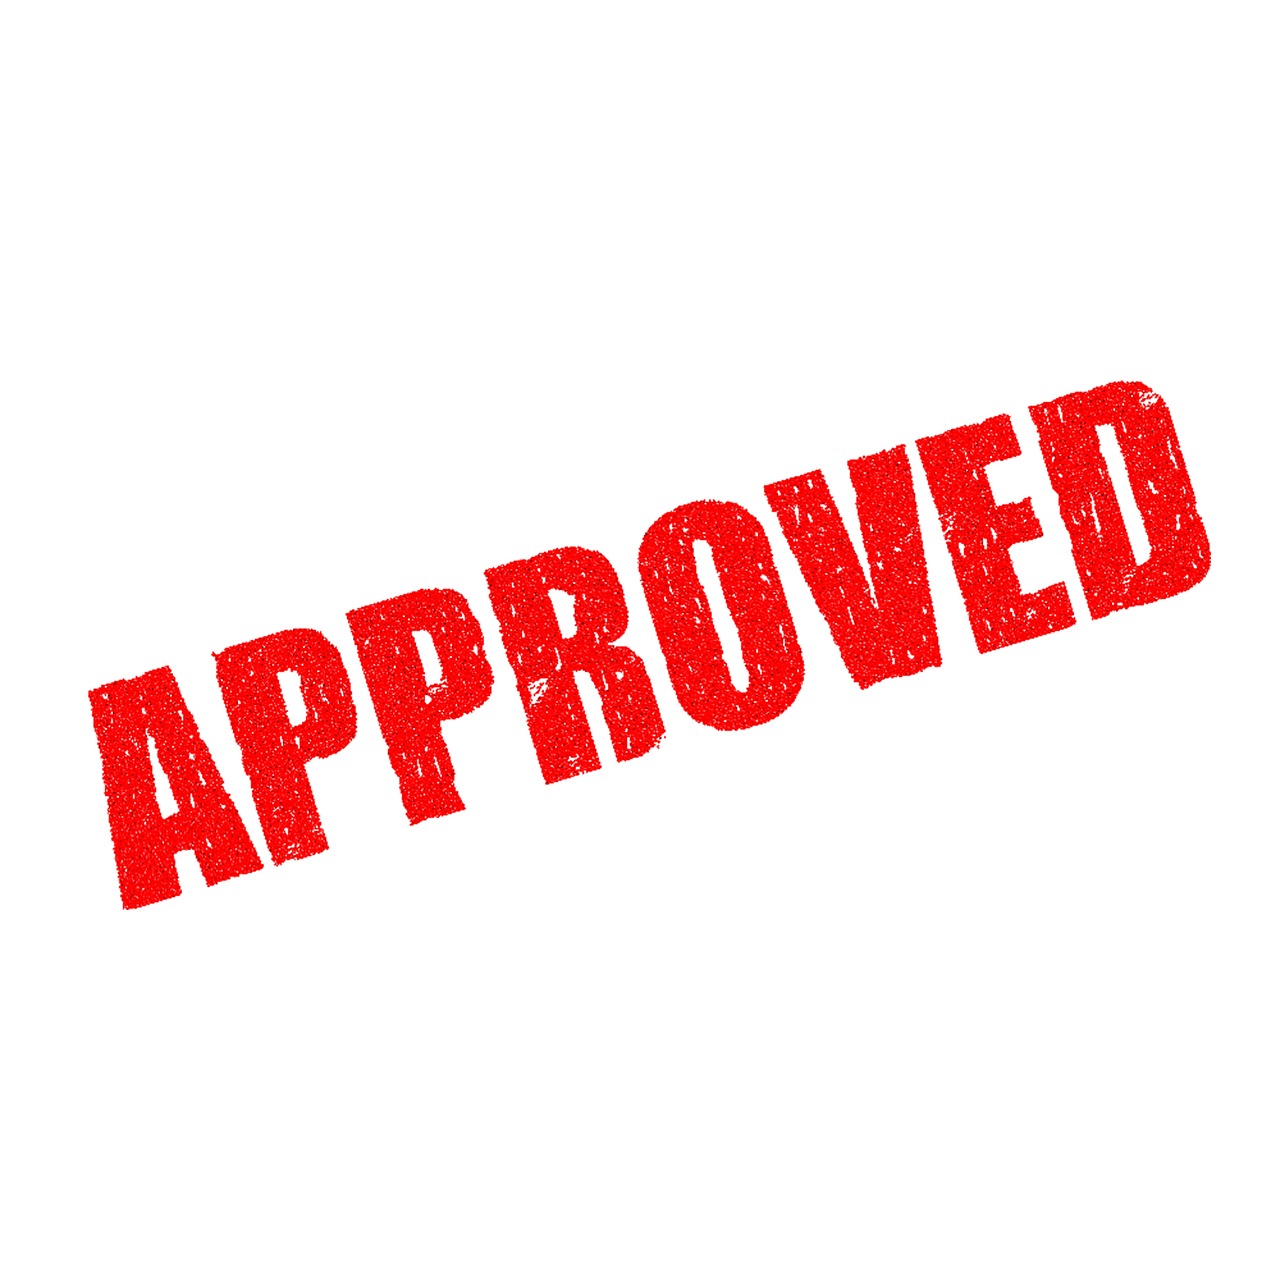 cipla-receives-final-approval-for-generic-version-of-proventil-pharmatutor